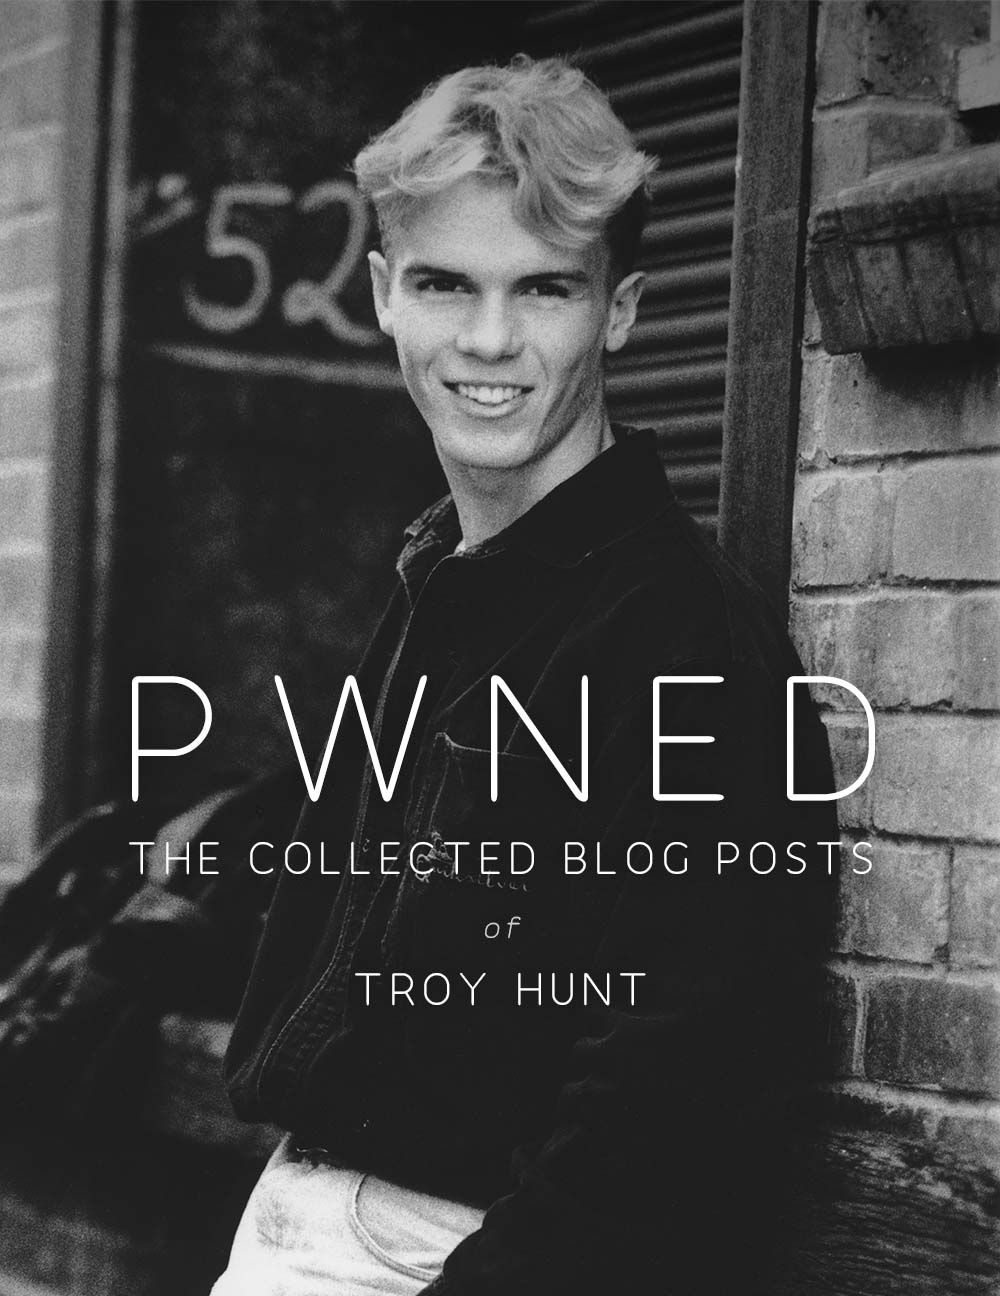 Pwned - The Collected Blog Posts of Troy Hunt